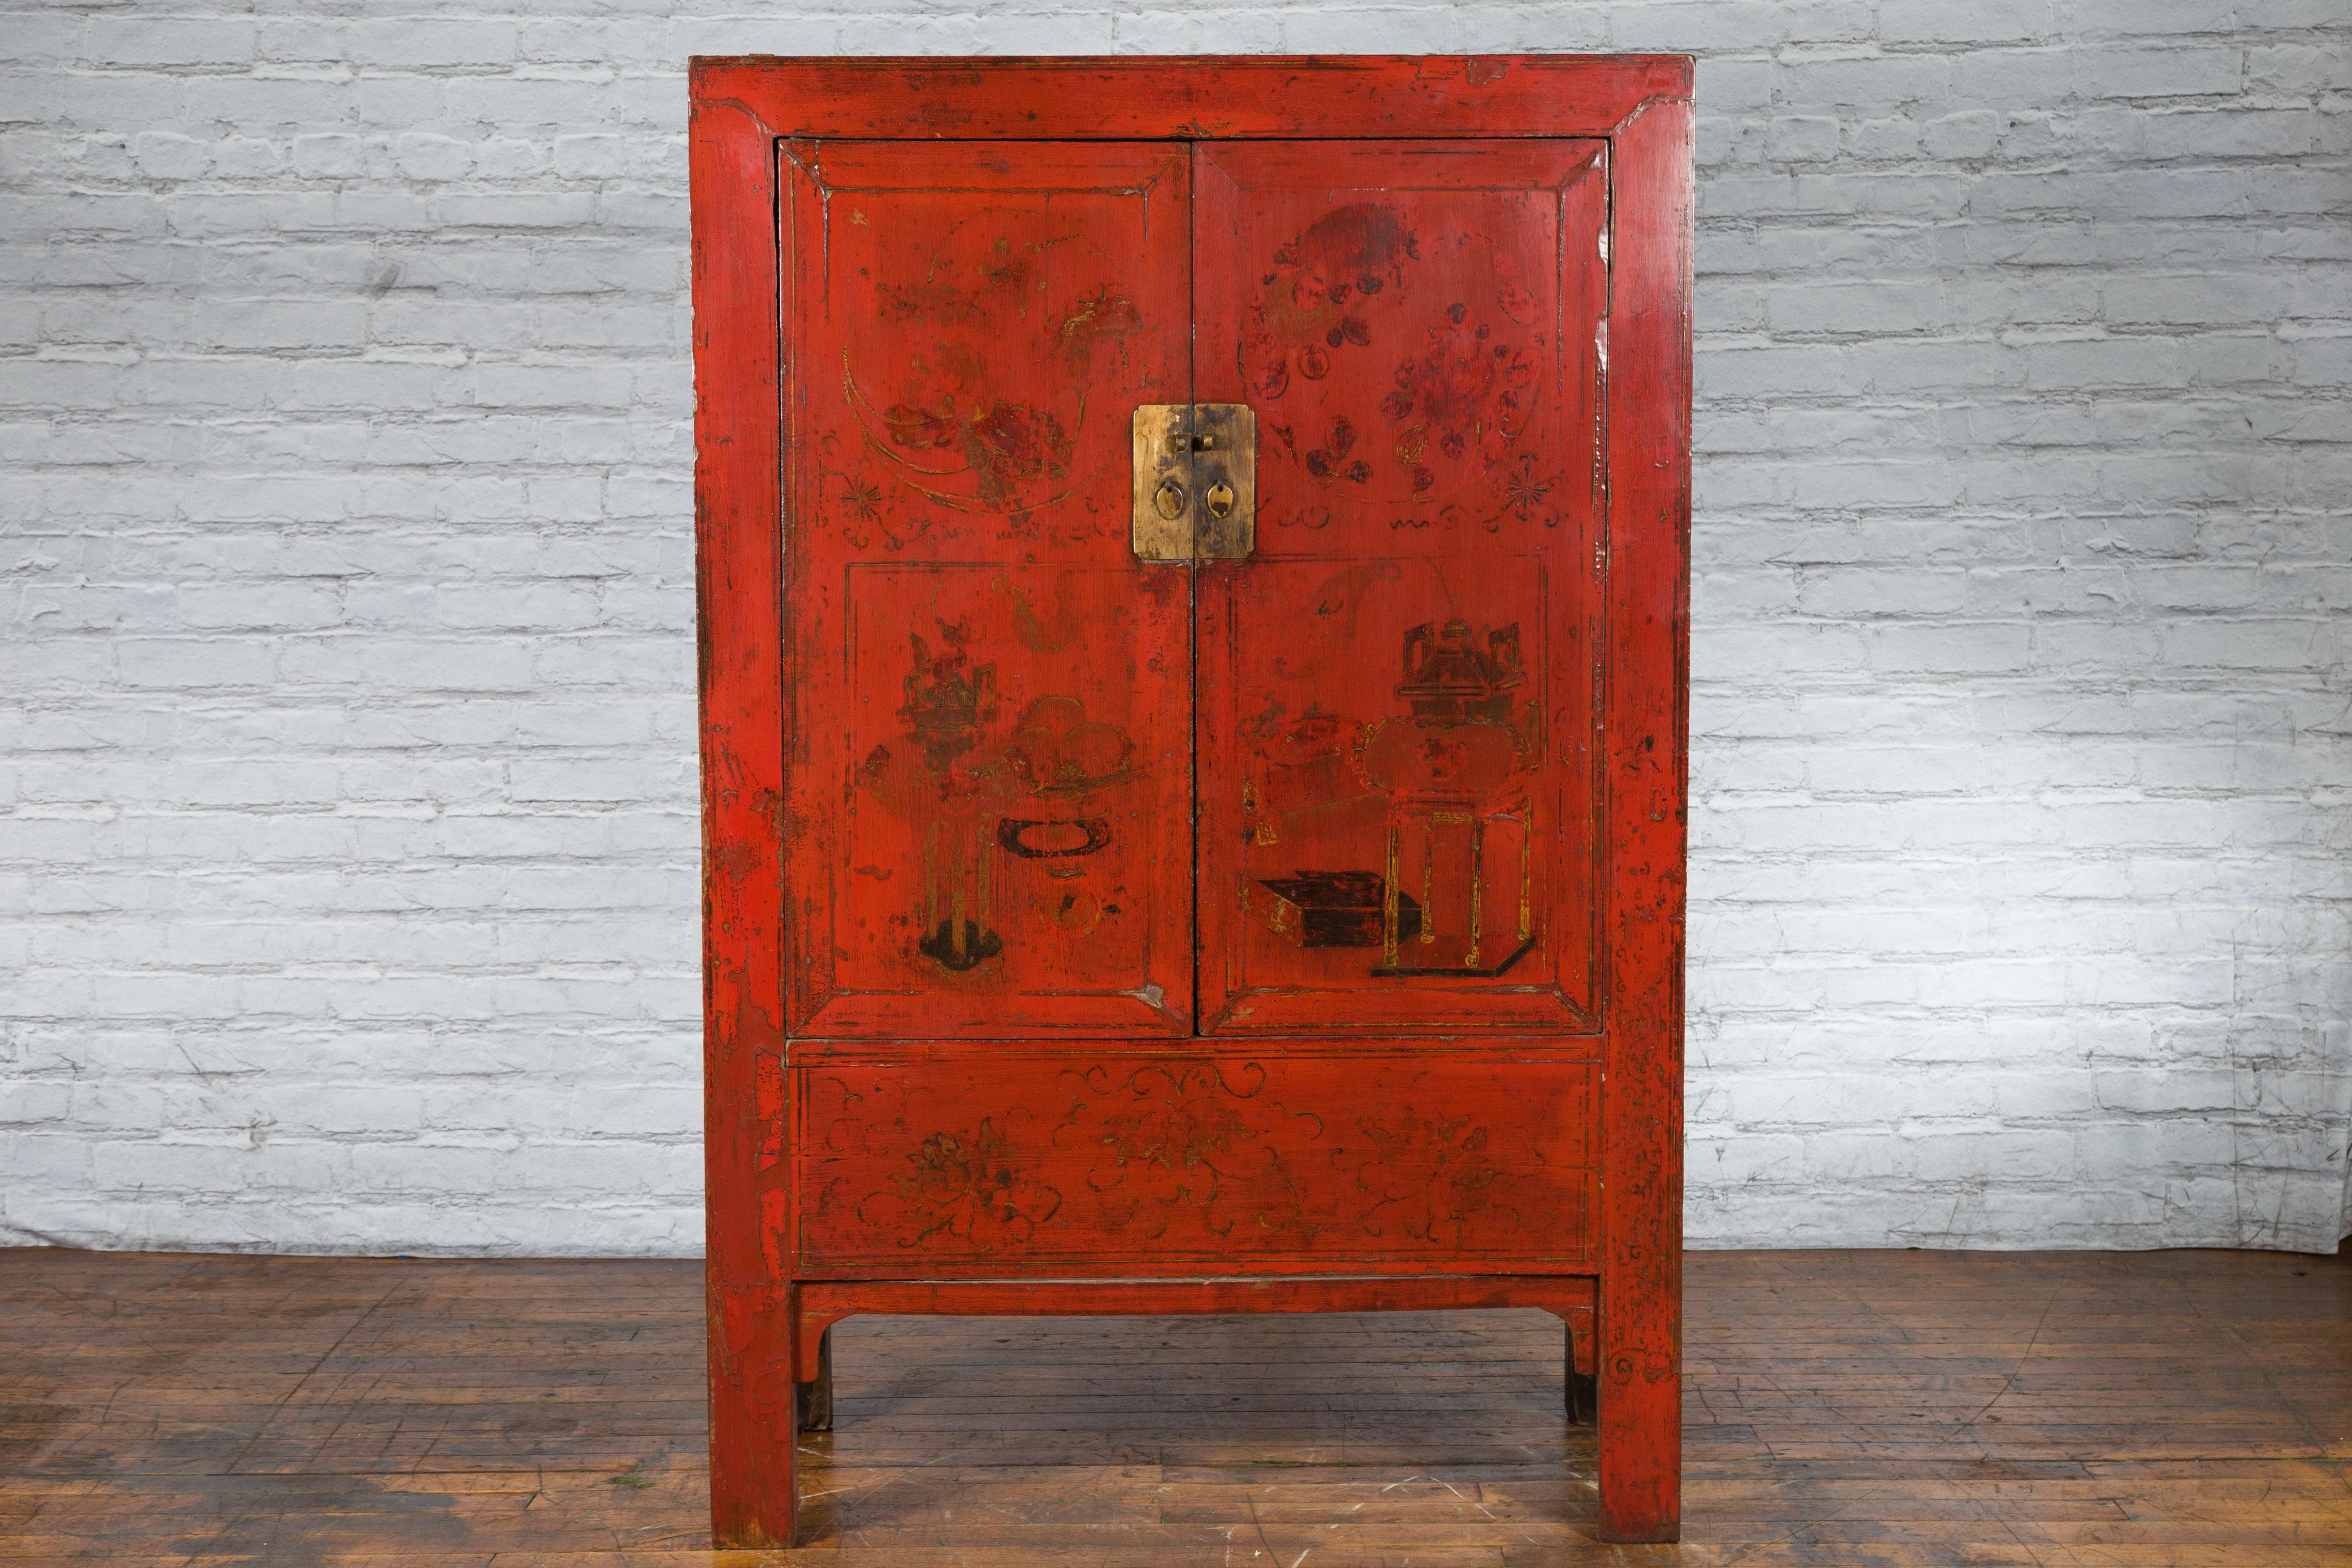 A Chinese Qing Dynasty period Shanxi wedding cabinet from the 19th century with original red lacquer and hand-painted floral décor. Created in the North-Eastern province of Shanxi during the Qing dynasty in the 19th century, this wedding cabinet